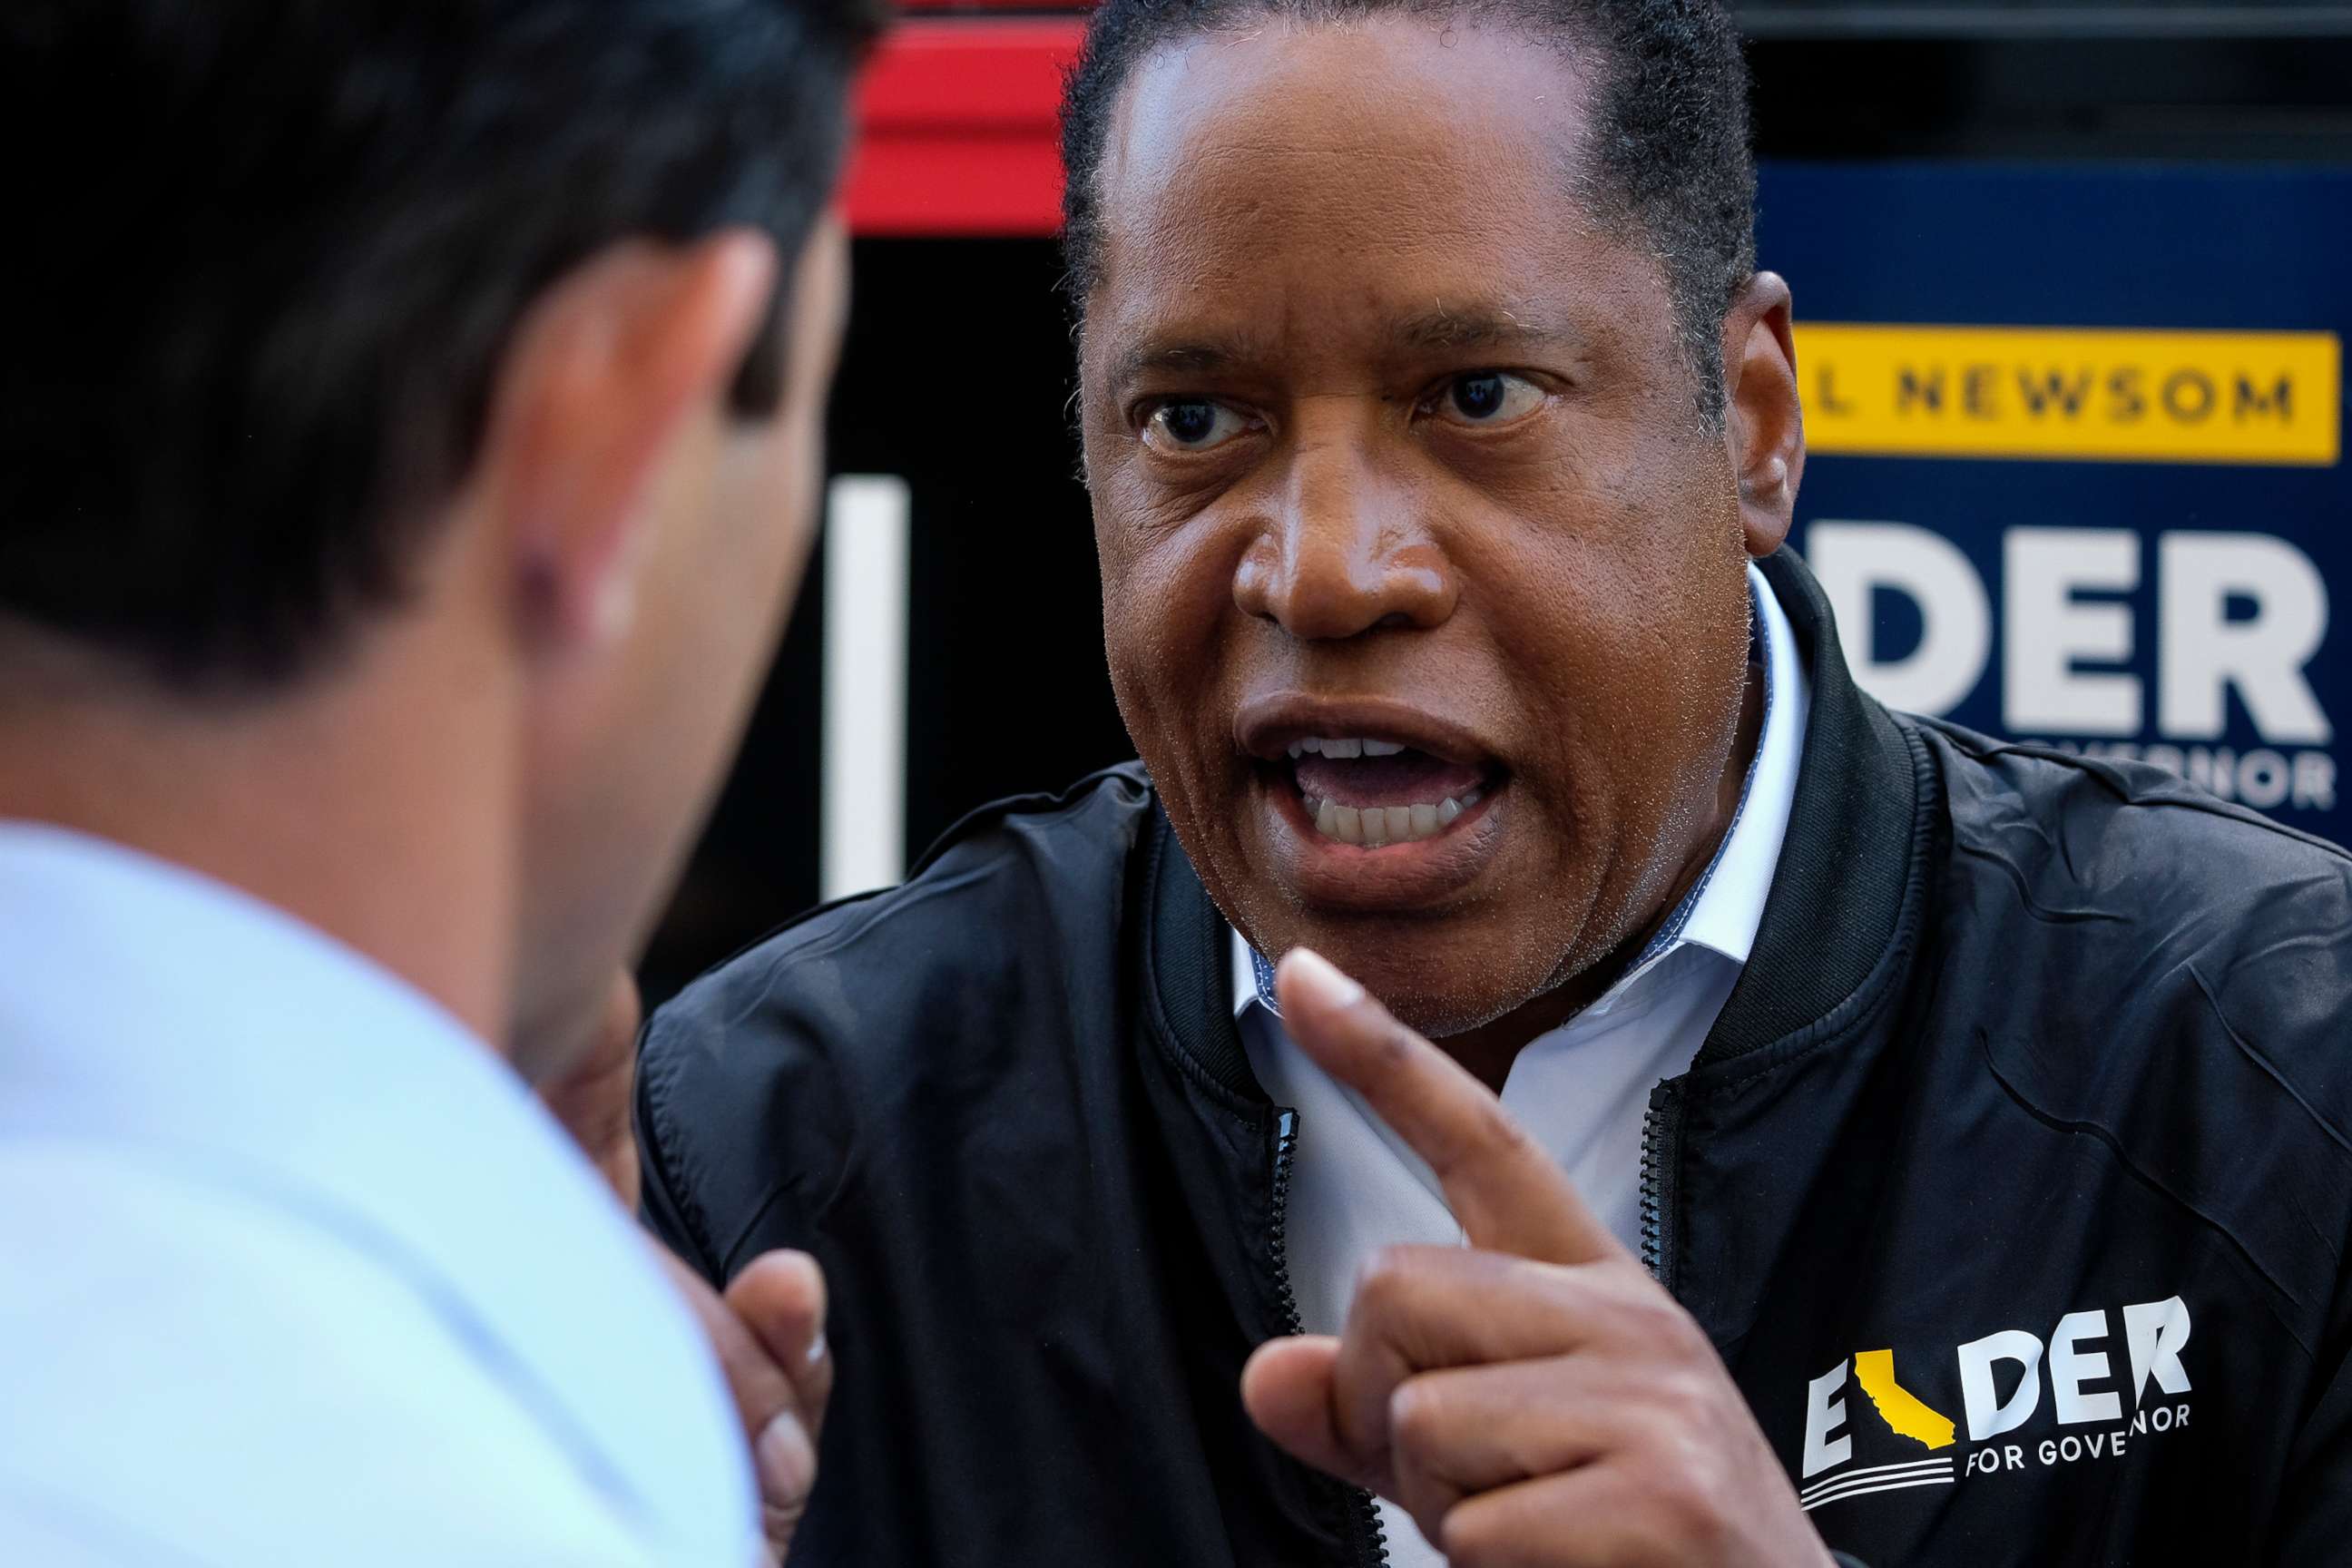 PHOTO: Republican conservative radio show host Larry Elder argues with a TV reporter during an interview after visiting a deli during a campaign for the California gubernatorial recall election on Monday, Sept. 13, 2021, in Los Angeles.